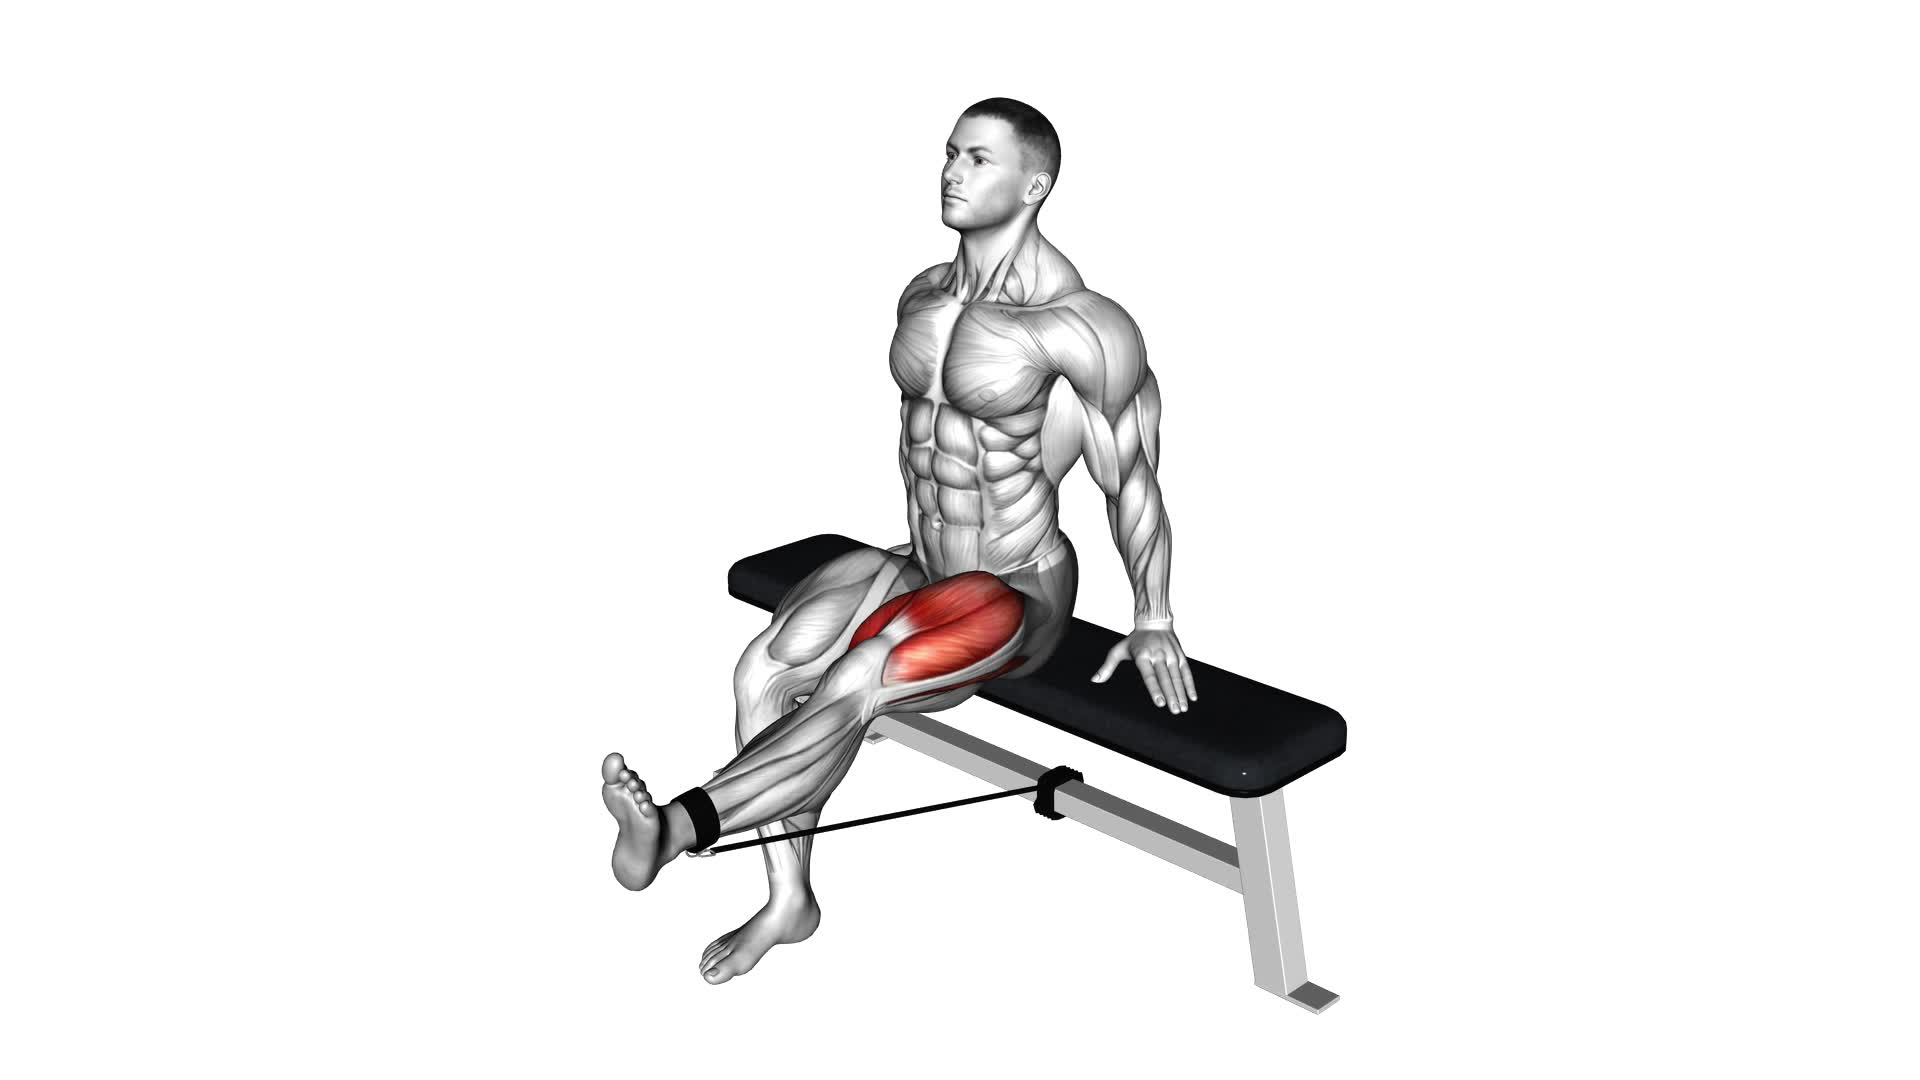 Band Seated Leg Extension (male) - Video Exercise Guide & Tips